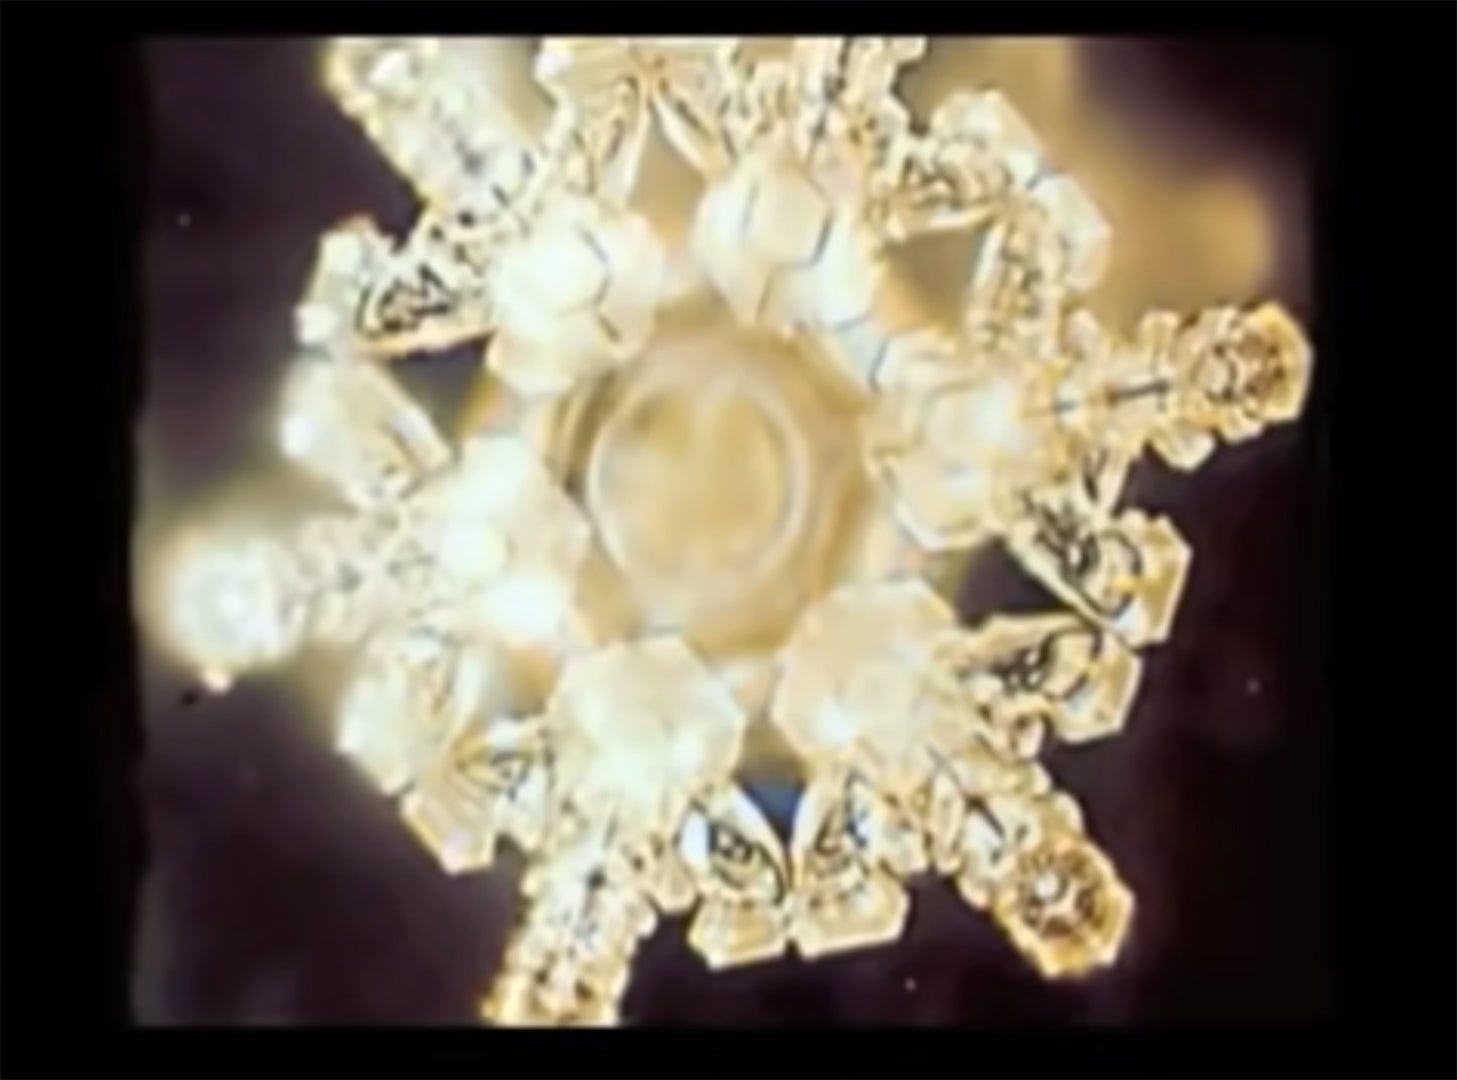 Dr. Masaru Emoto Highlights The Link Between Consciousness And Matter - DSF Antique Jewelry